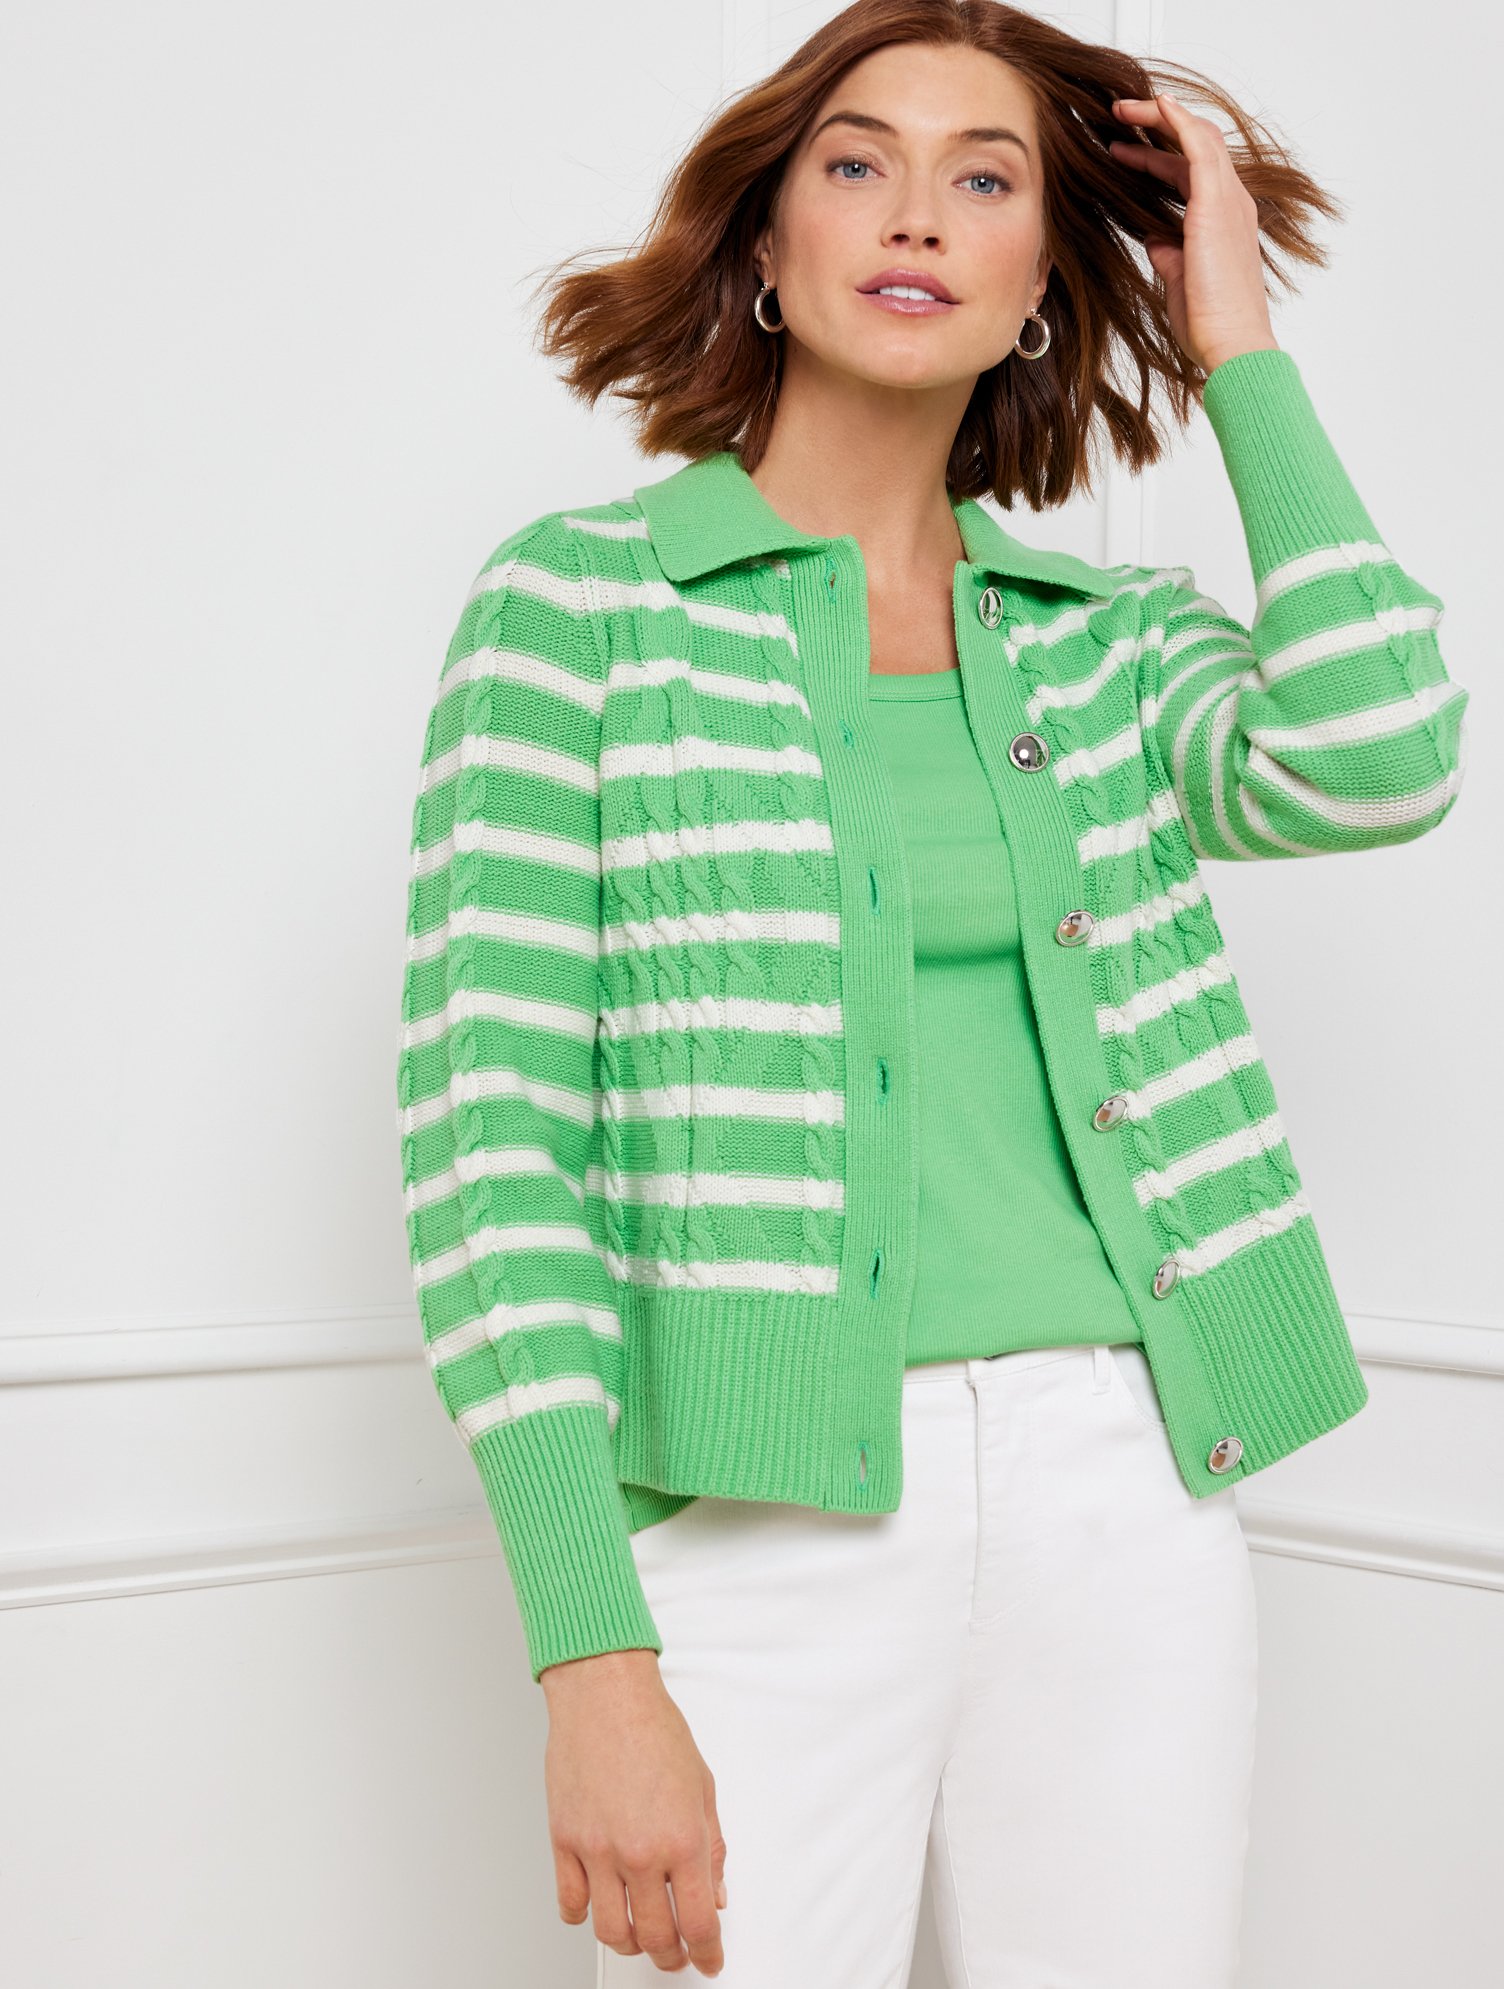 Talbots Cable Knit Collared Cardigan Sweater - Stripe - Green Apple - 1x